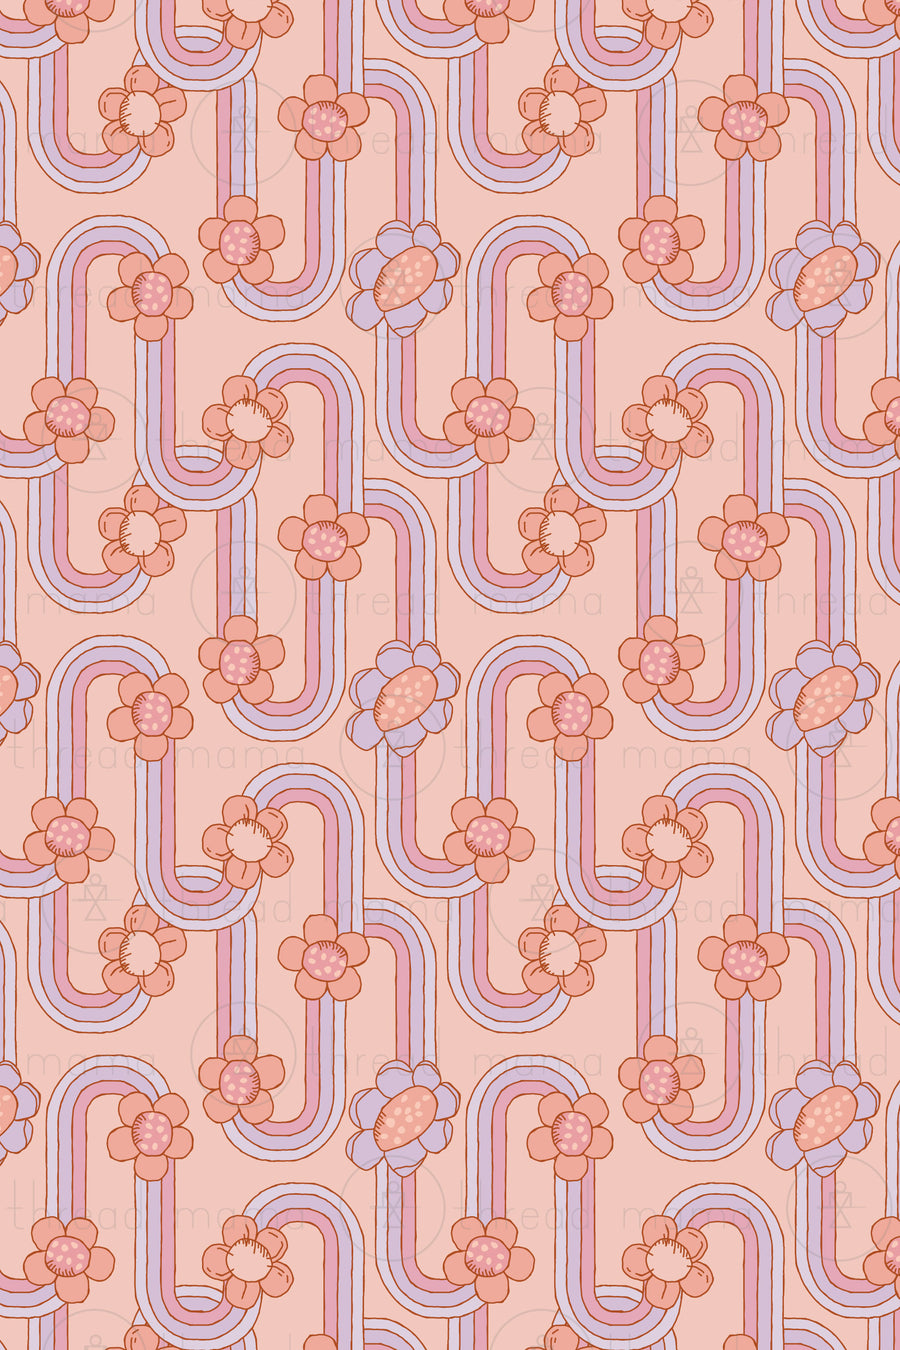 Repeating Pattern 186 (Seamless)